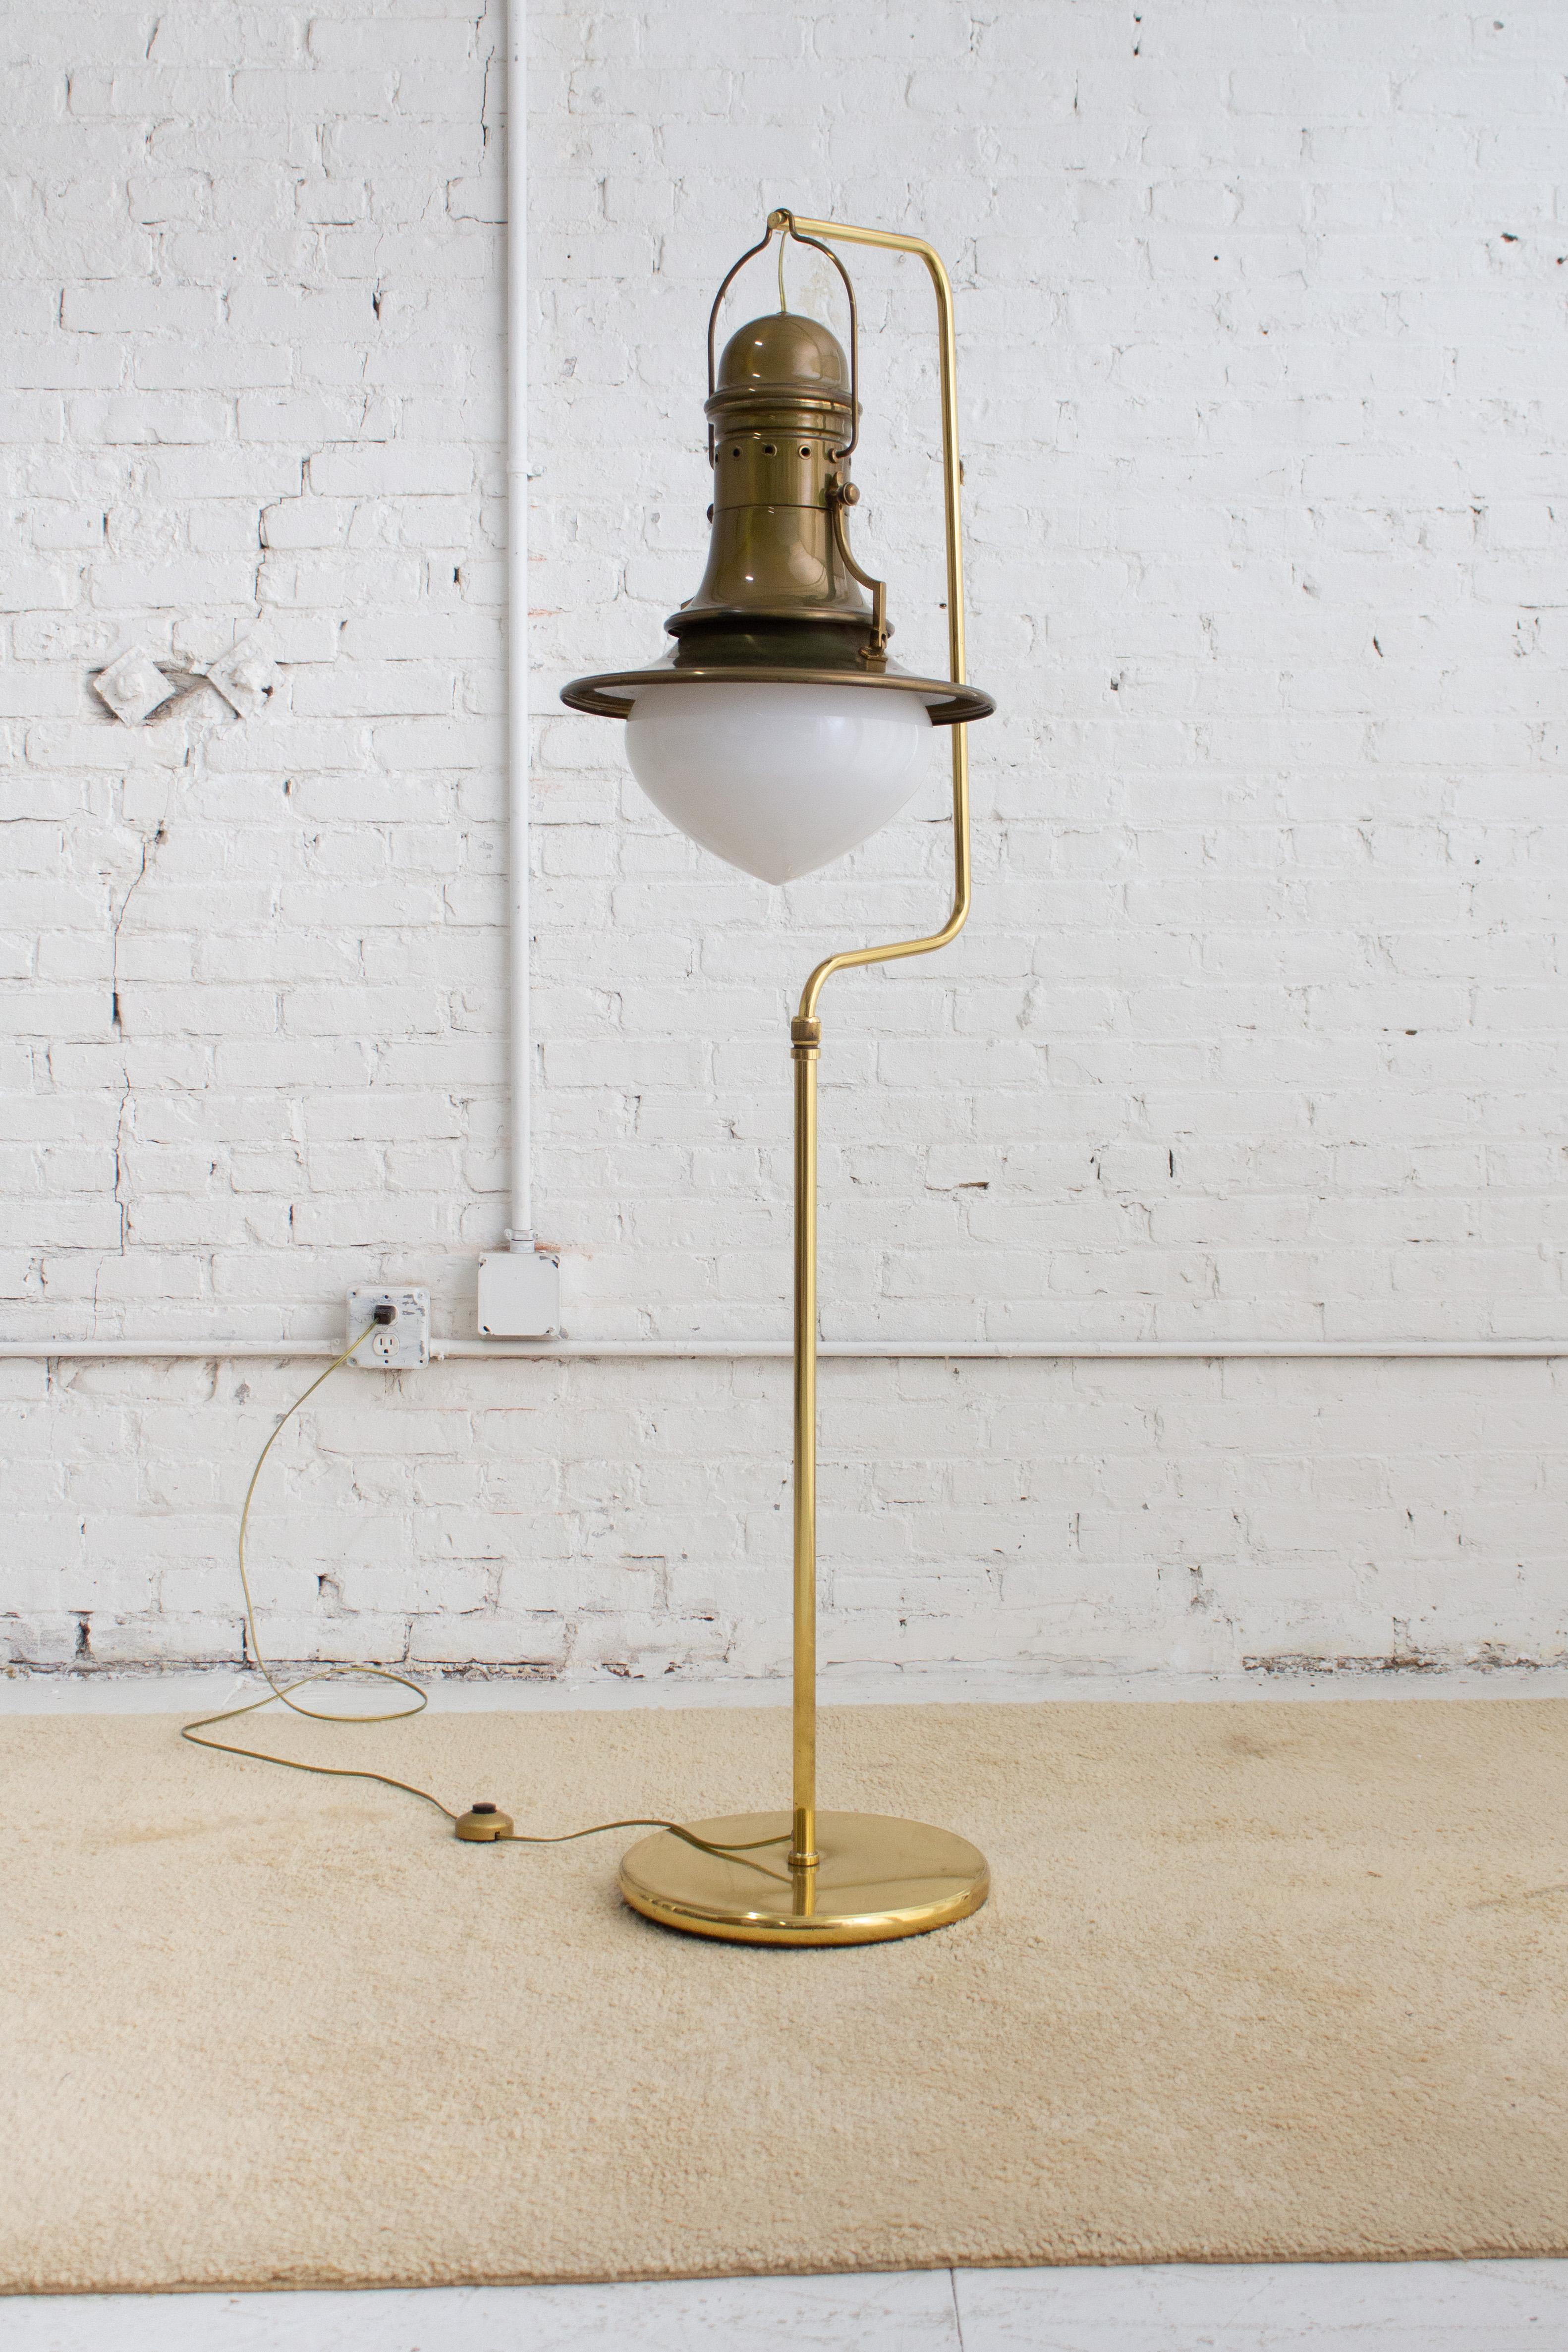 An Italian lantern style floor lamp. A brass stand with heavily weighted base holds an 